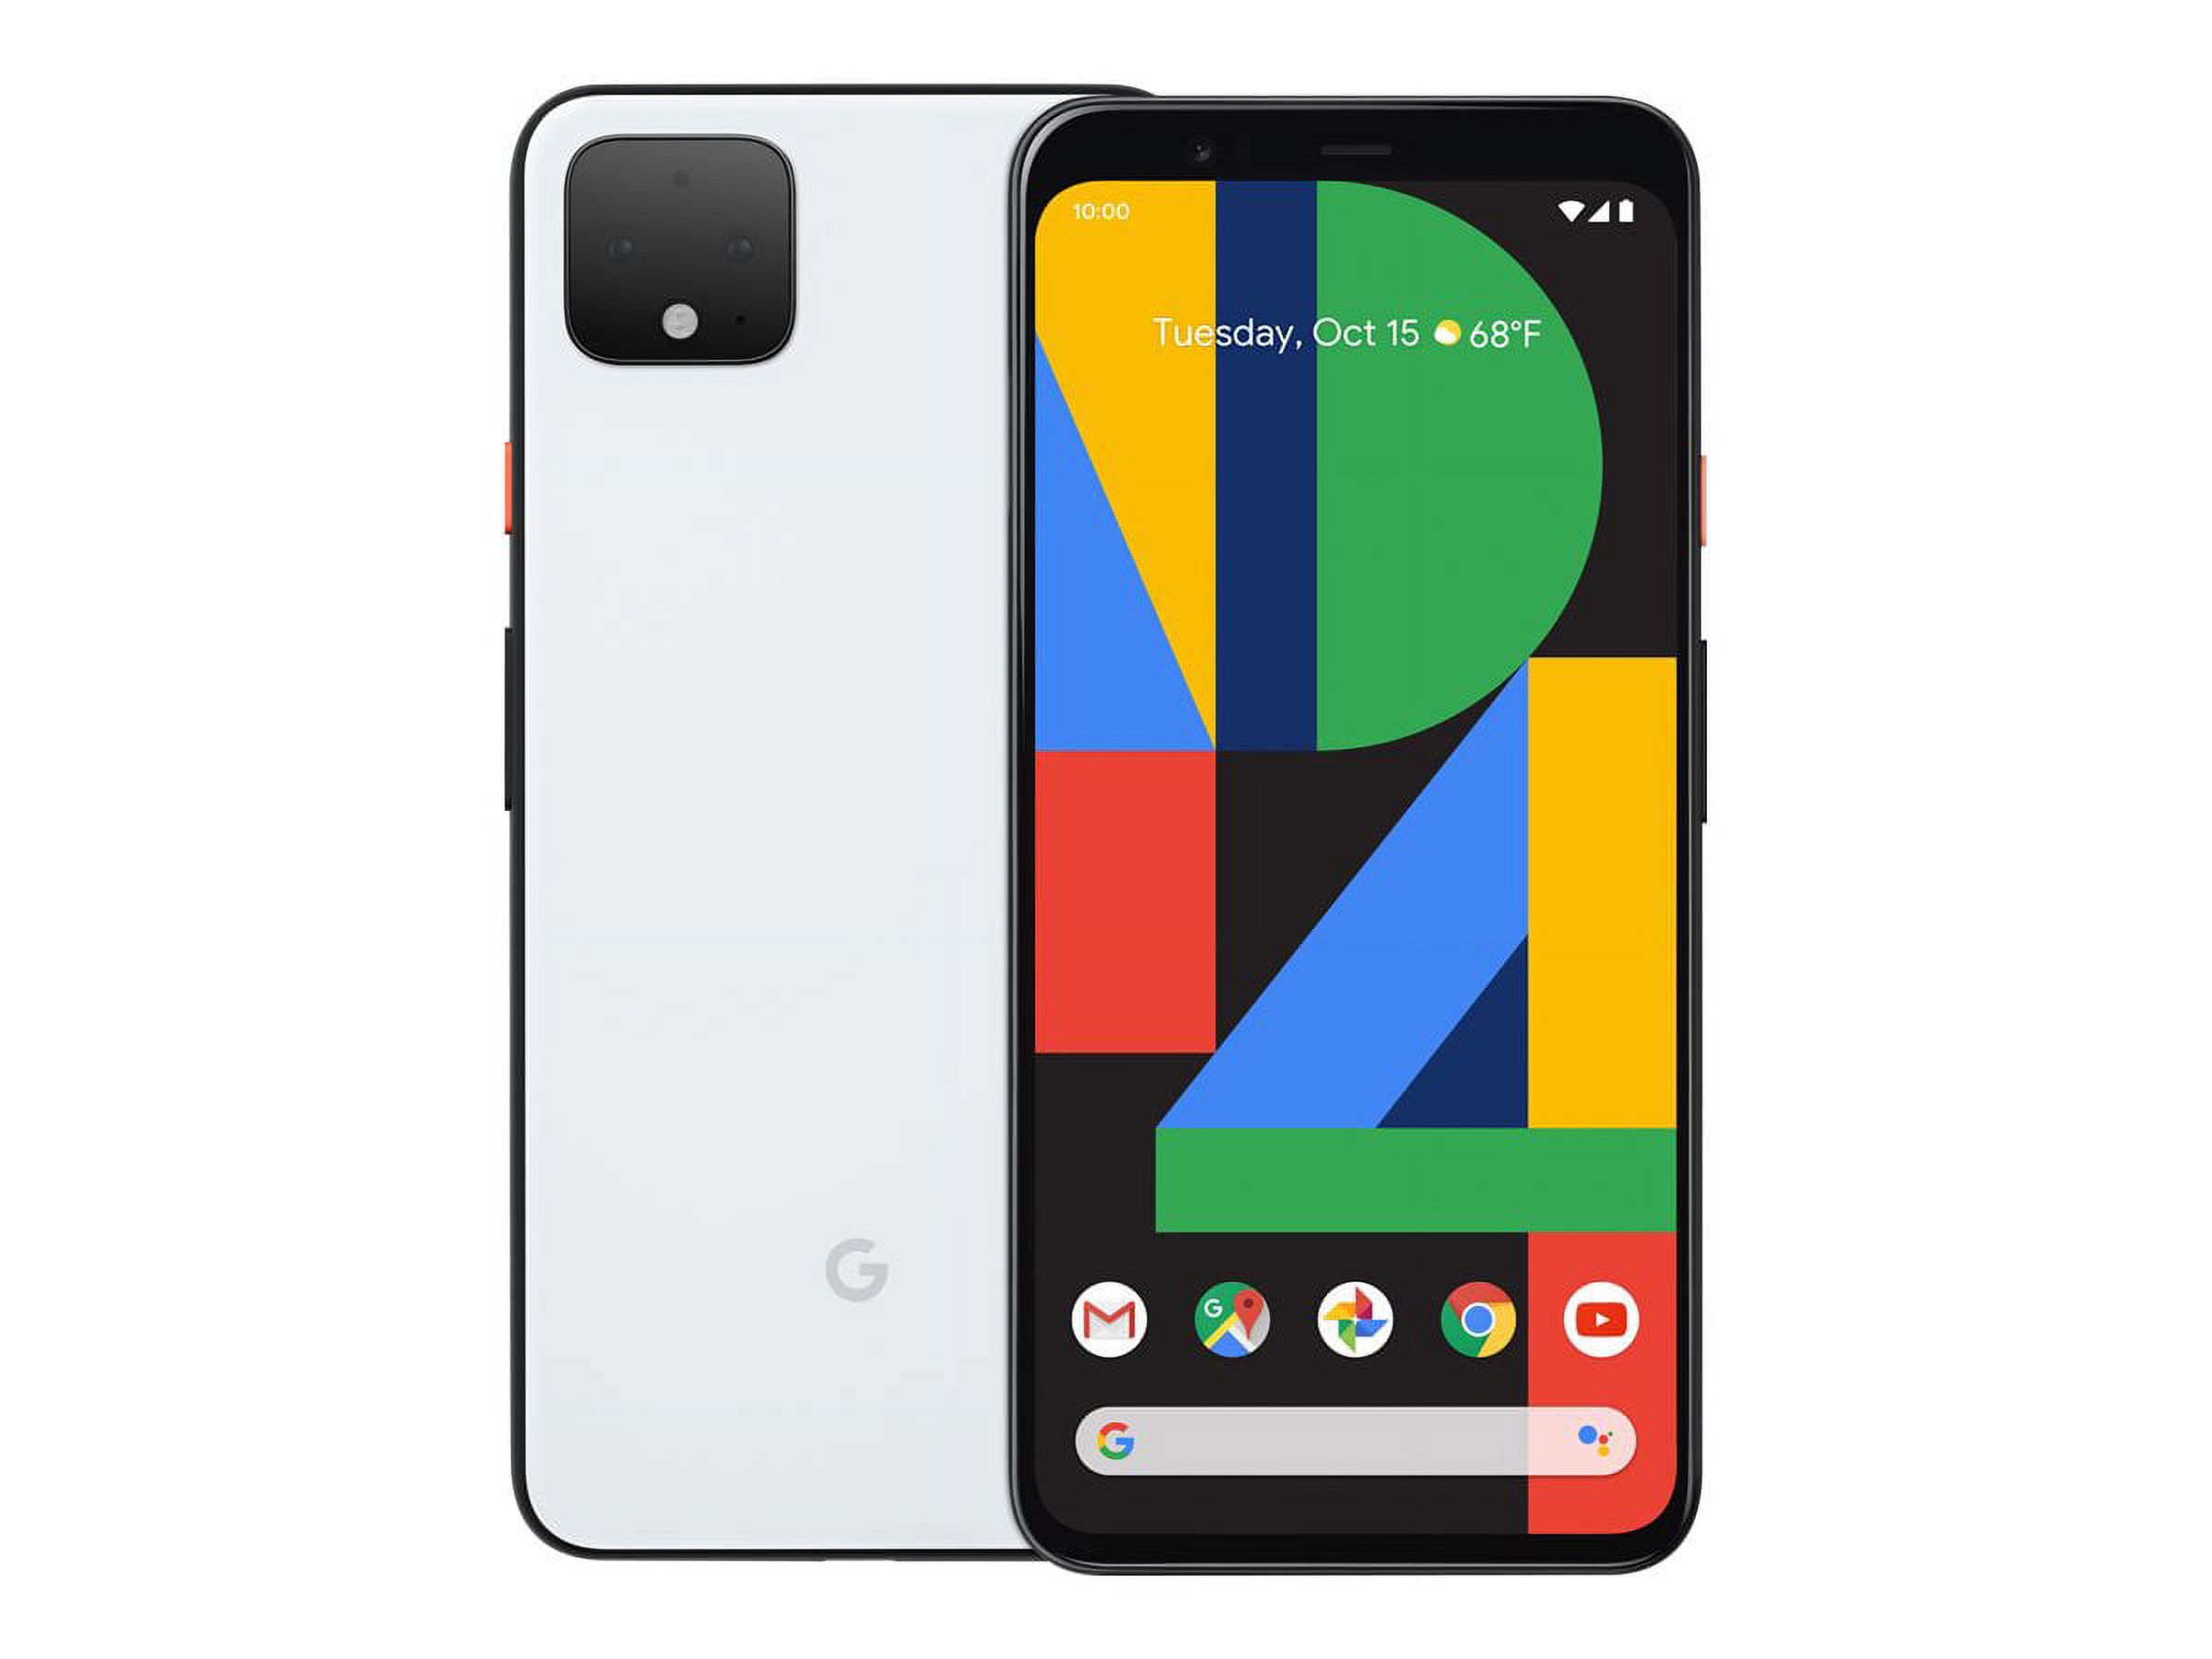 Google Pixel 4 XL - 4G smartphone - RAM 6 GB / Internal Memory 64 GB - OLED display - 6.3" - 2x rear cameras 12.2 MP, 16 MP - front camera 8 MP - clearly white - image 2 of 3